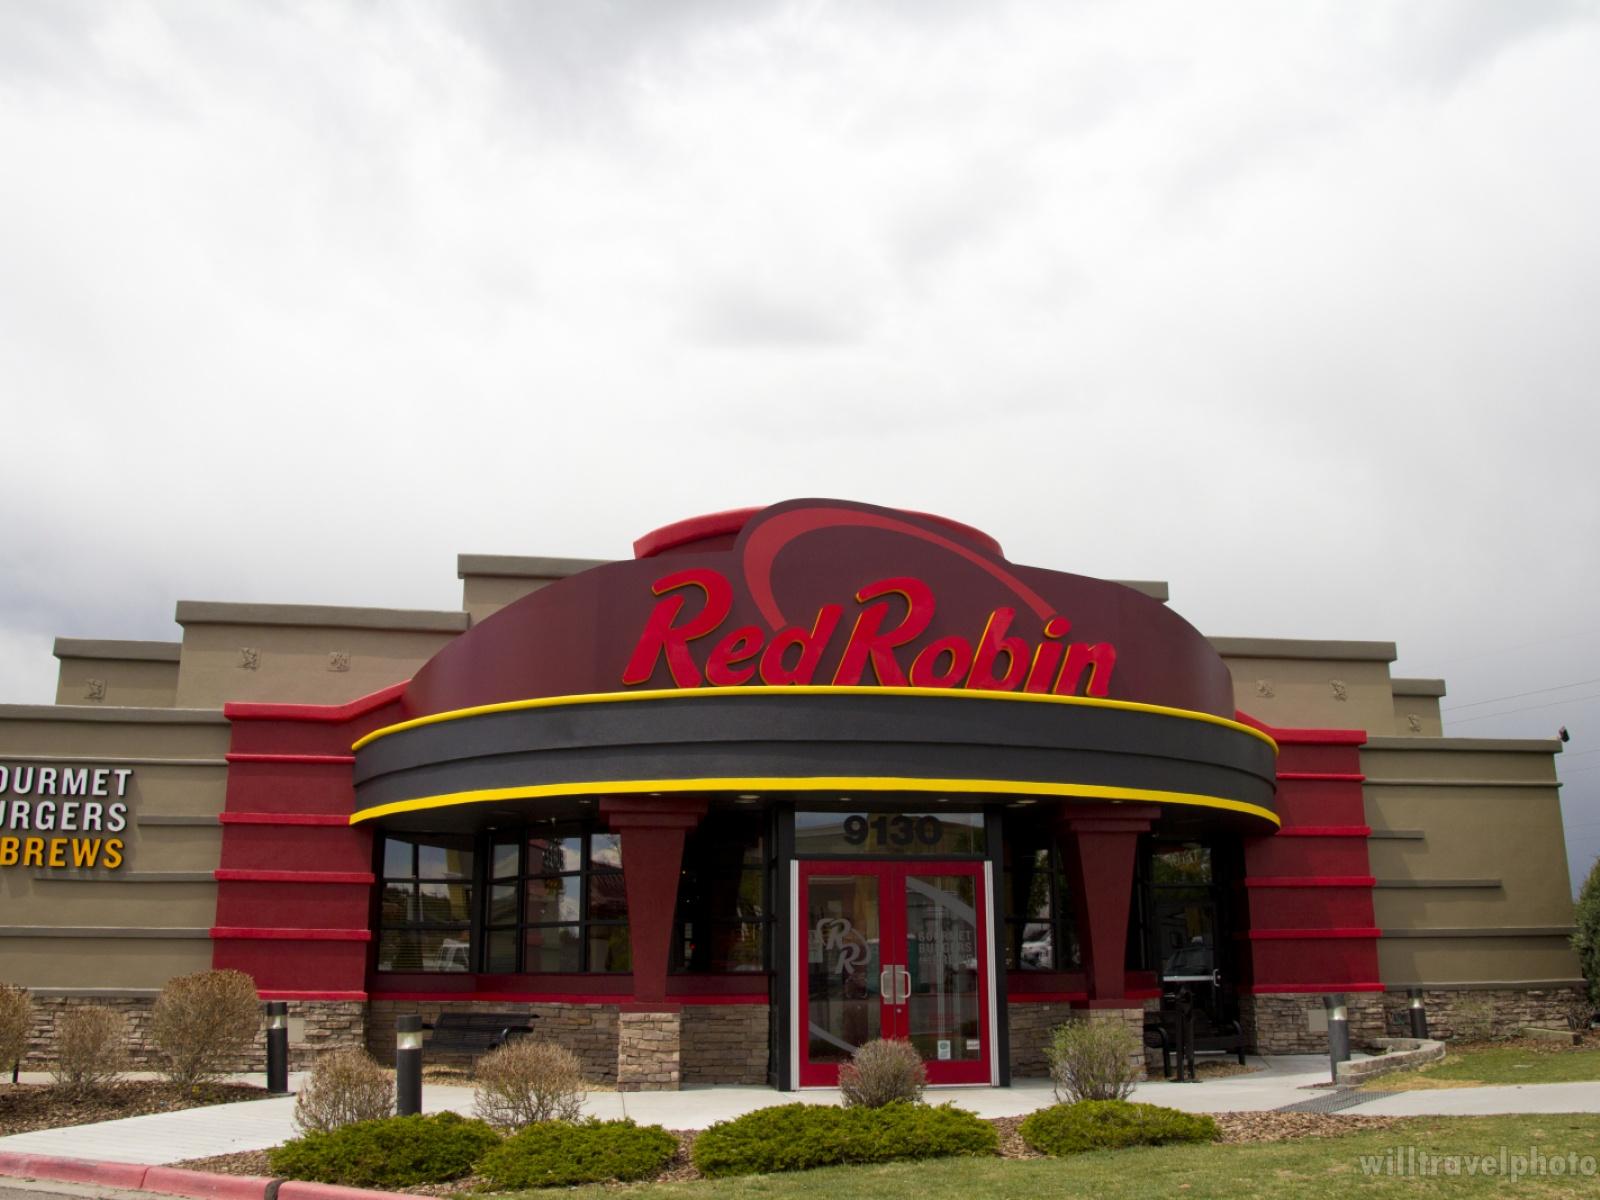 Red Robin exterior signage